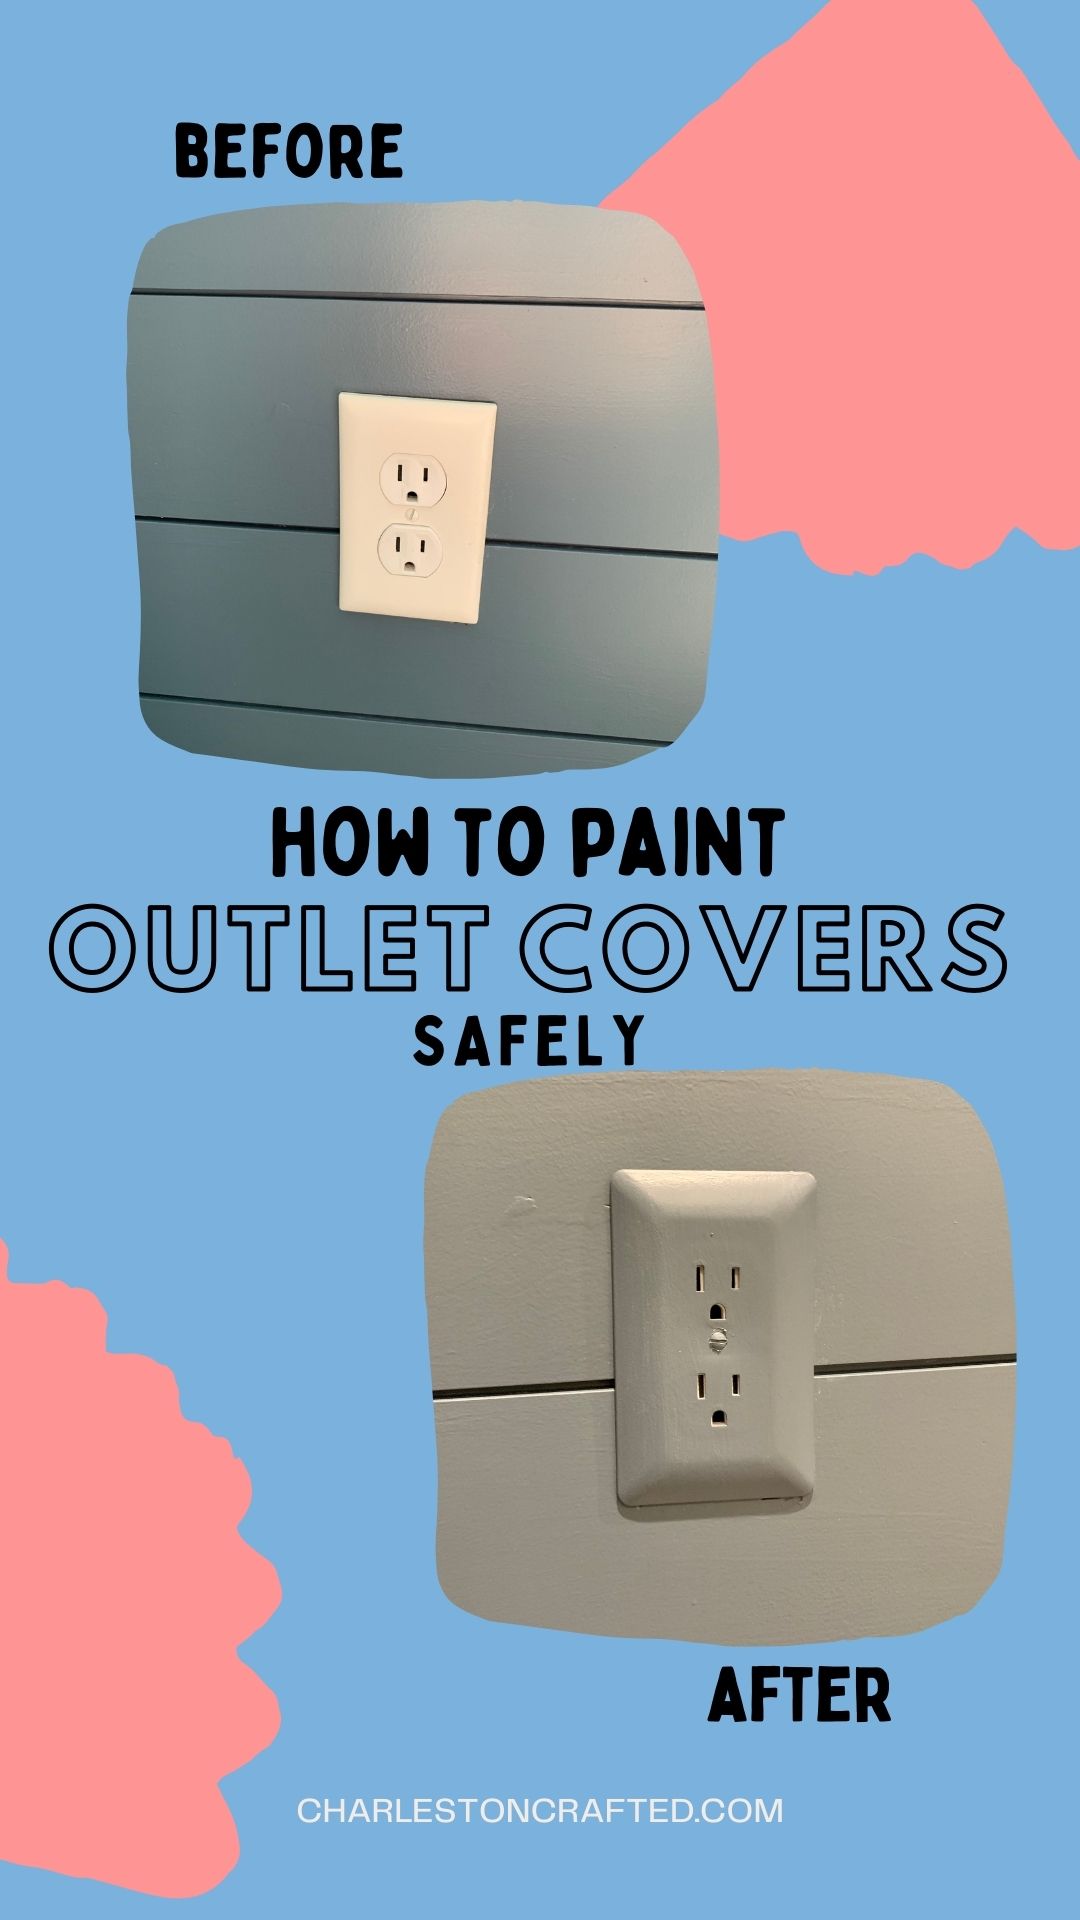 https://www.charlestoncrafted.com/wp-content/uploads/2021/10/how-to-paint-outlet-covers-safely.jpg